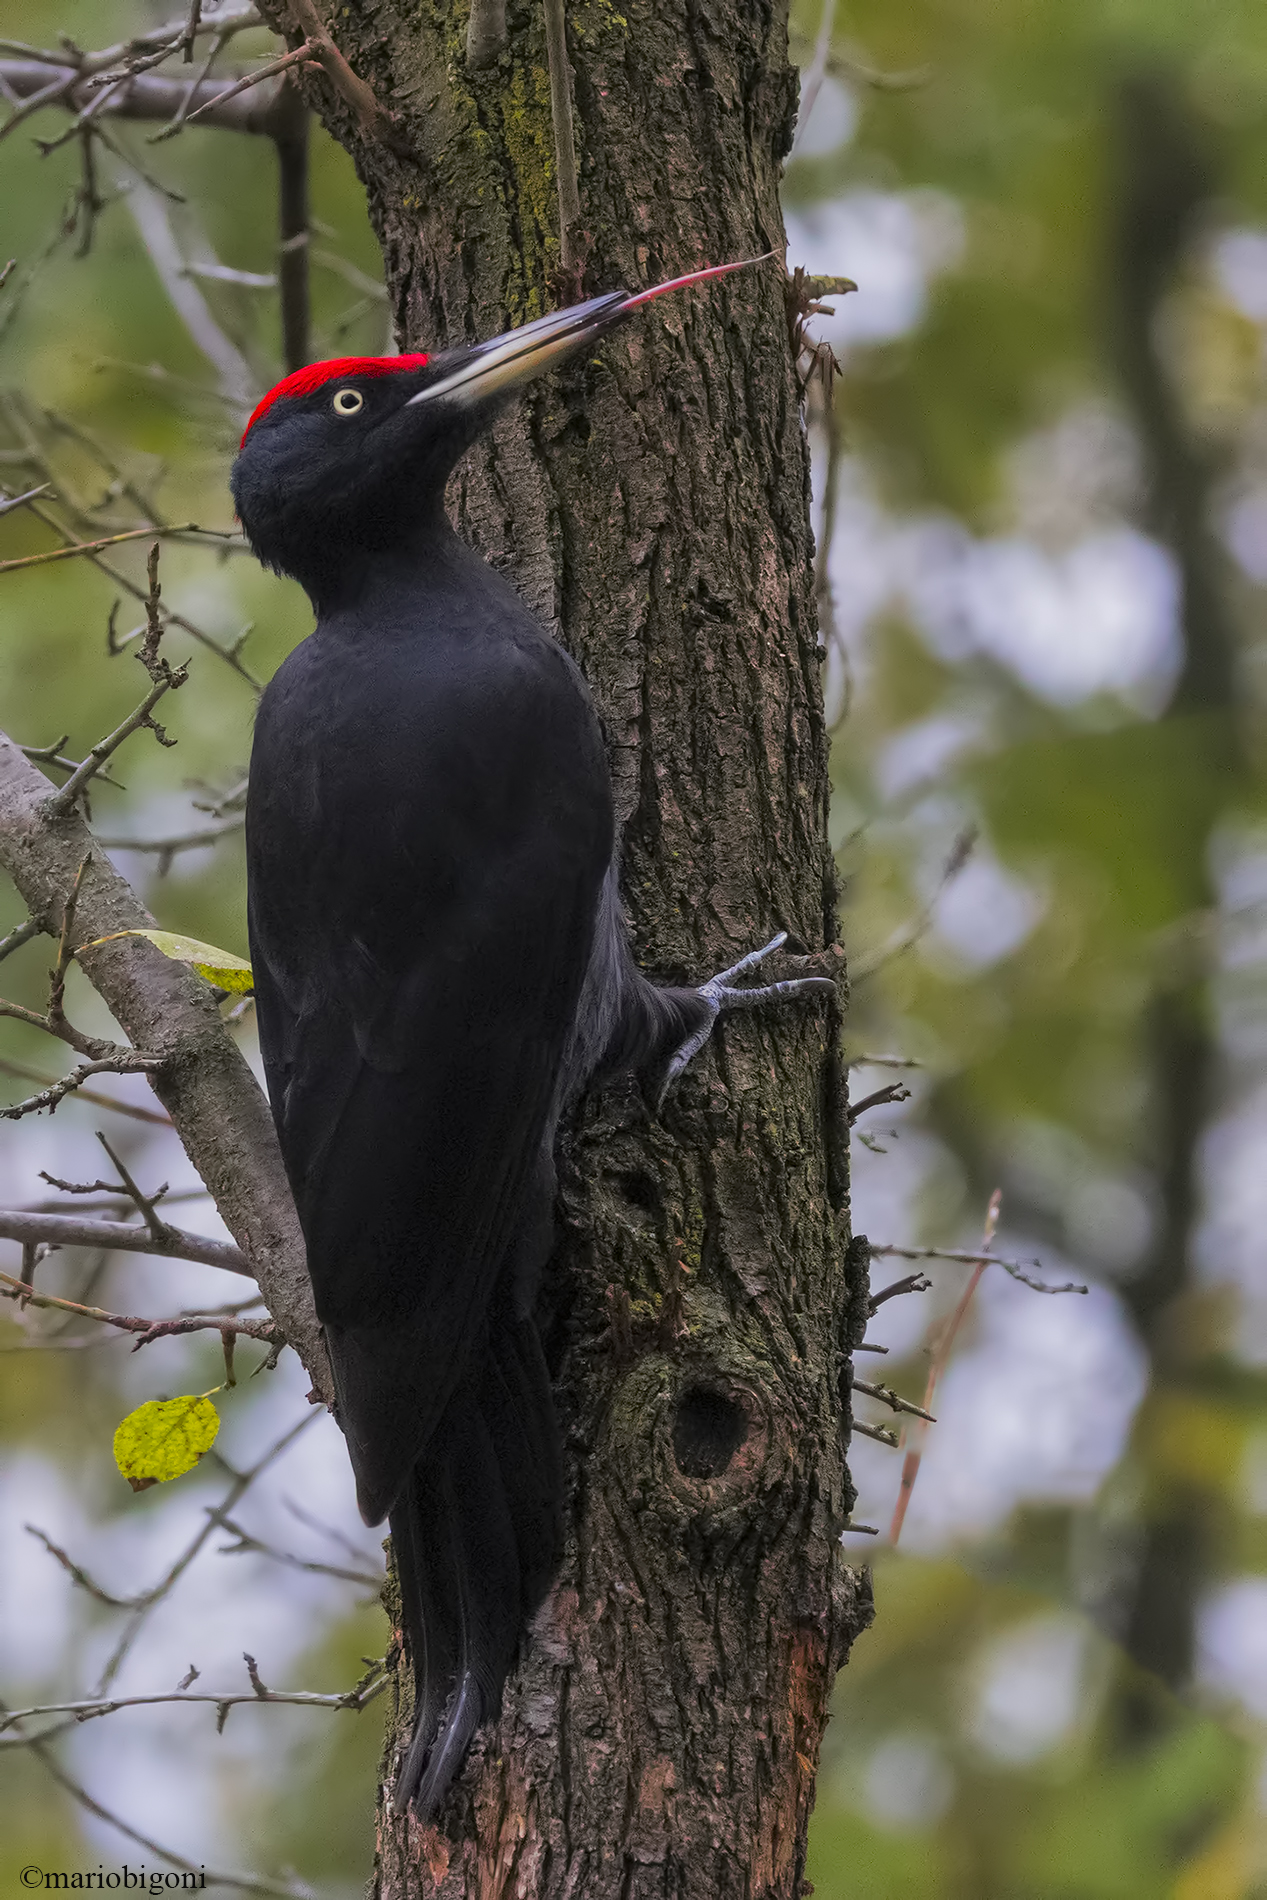 The Tongue of the Black Woodpecker...